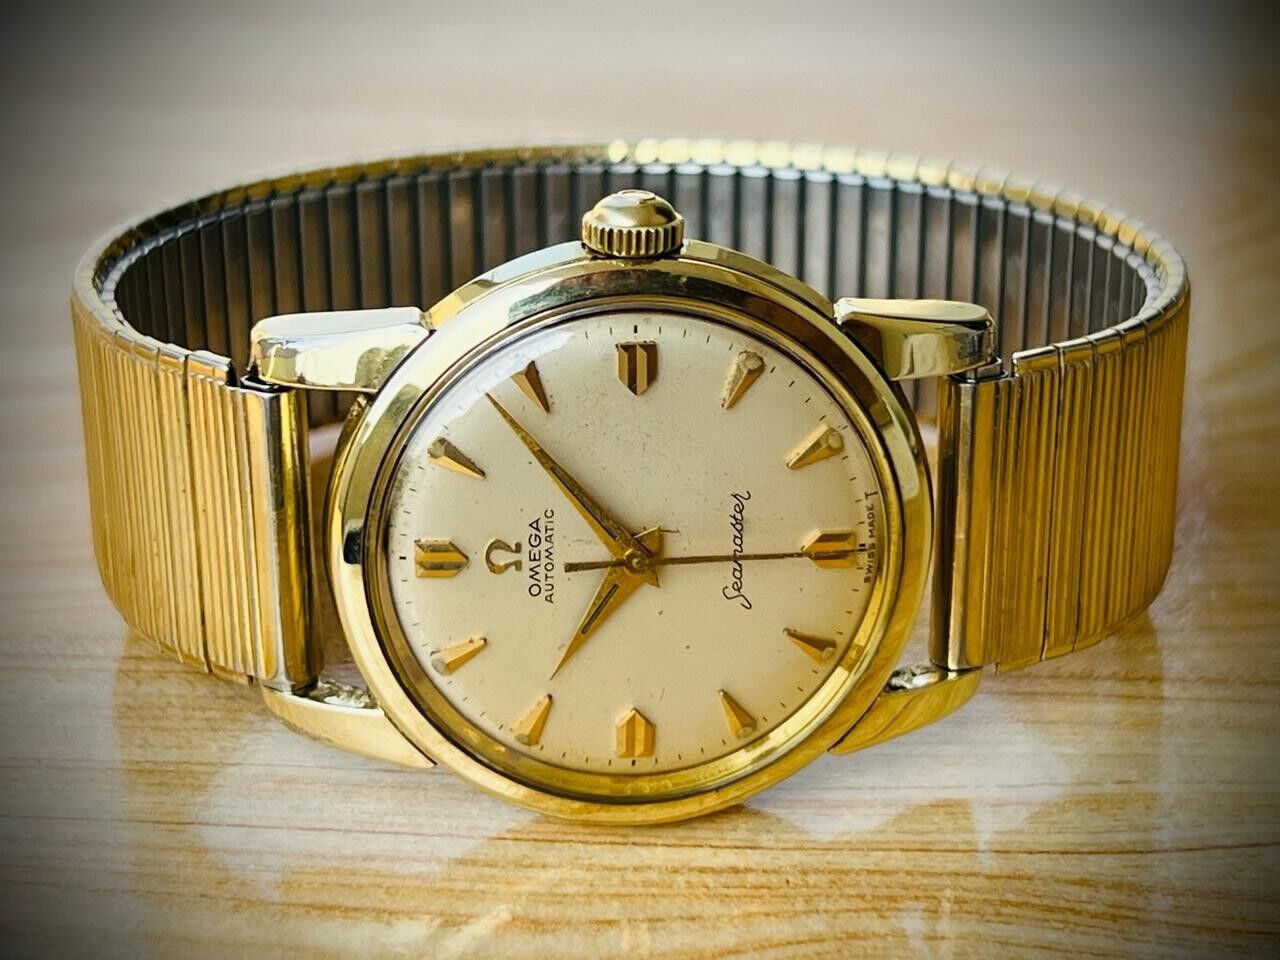 Vintage Omega Seamaster Ref.2648-4SC Automatic Cal.501 Mens Watch, 1950's, 34mm - Grab A Watch Co